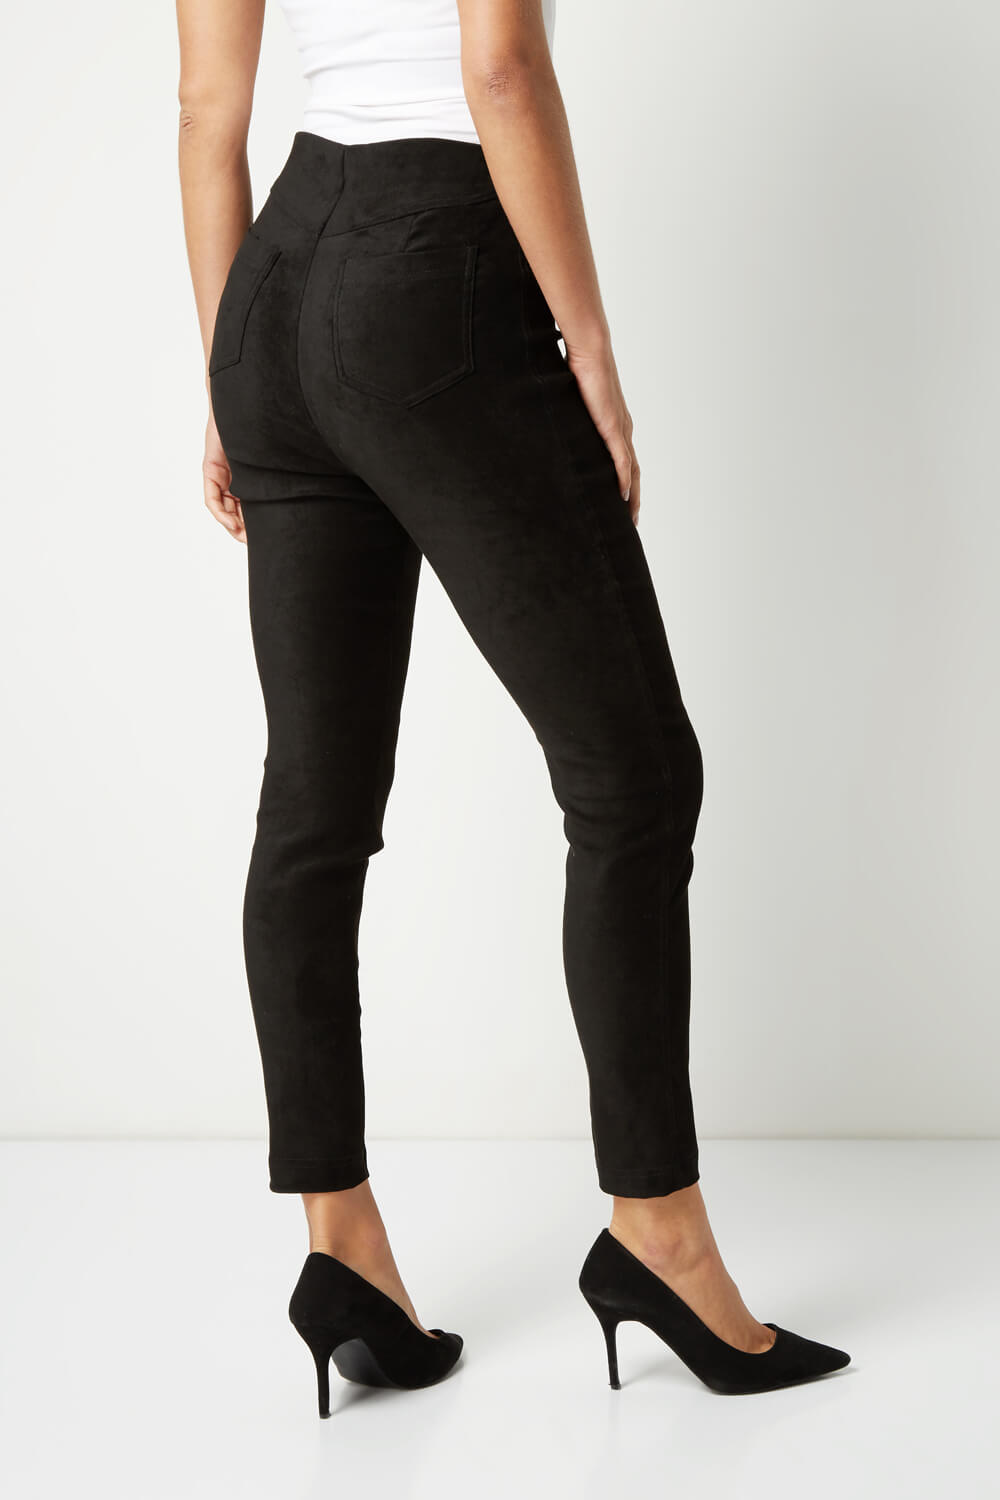 Black Full Length Suedette Stretch Trousers, Image 3 of 5